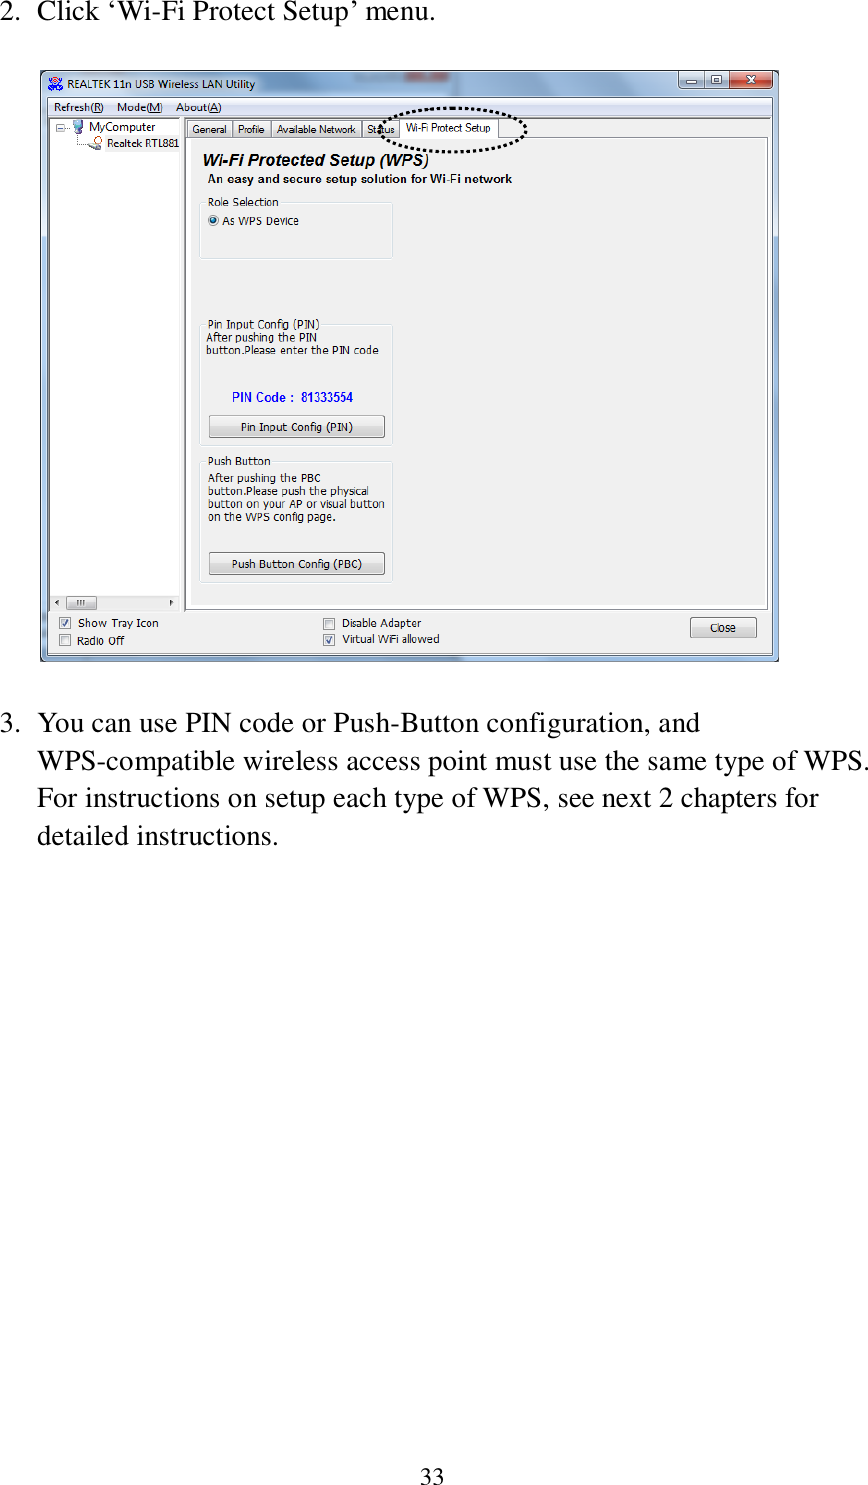  33 2. Click ‘Wi-Fi Protect Setup’ menu.     3. You can use PIN code or Push-Button configuration, and WPS-compatible wireless access point must use the same type of WPS. For instructions on setup each type of WPS, see next 2 chapters for detailed instructions.       